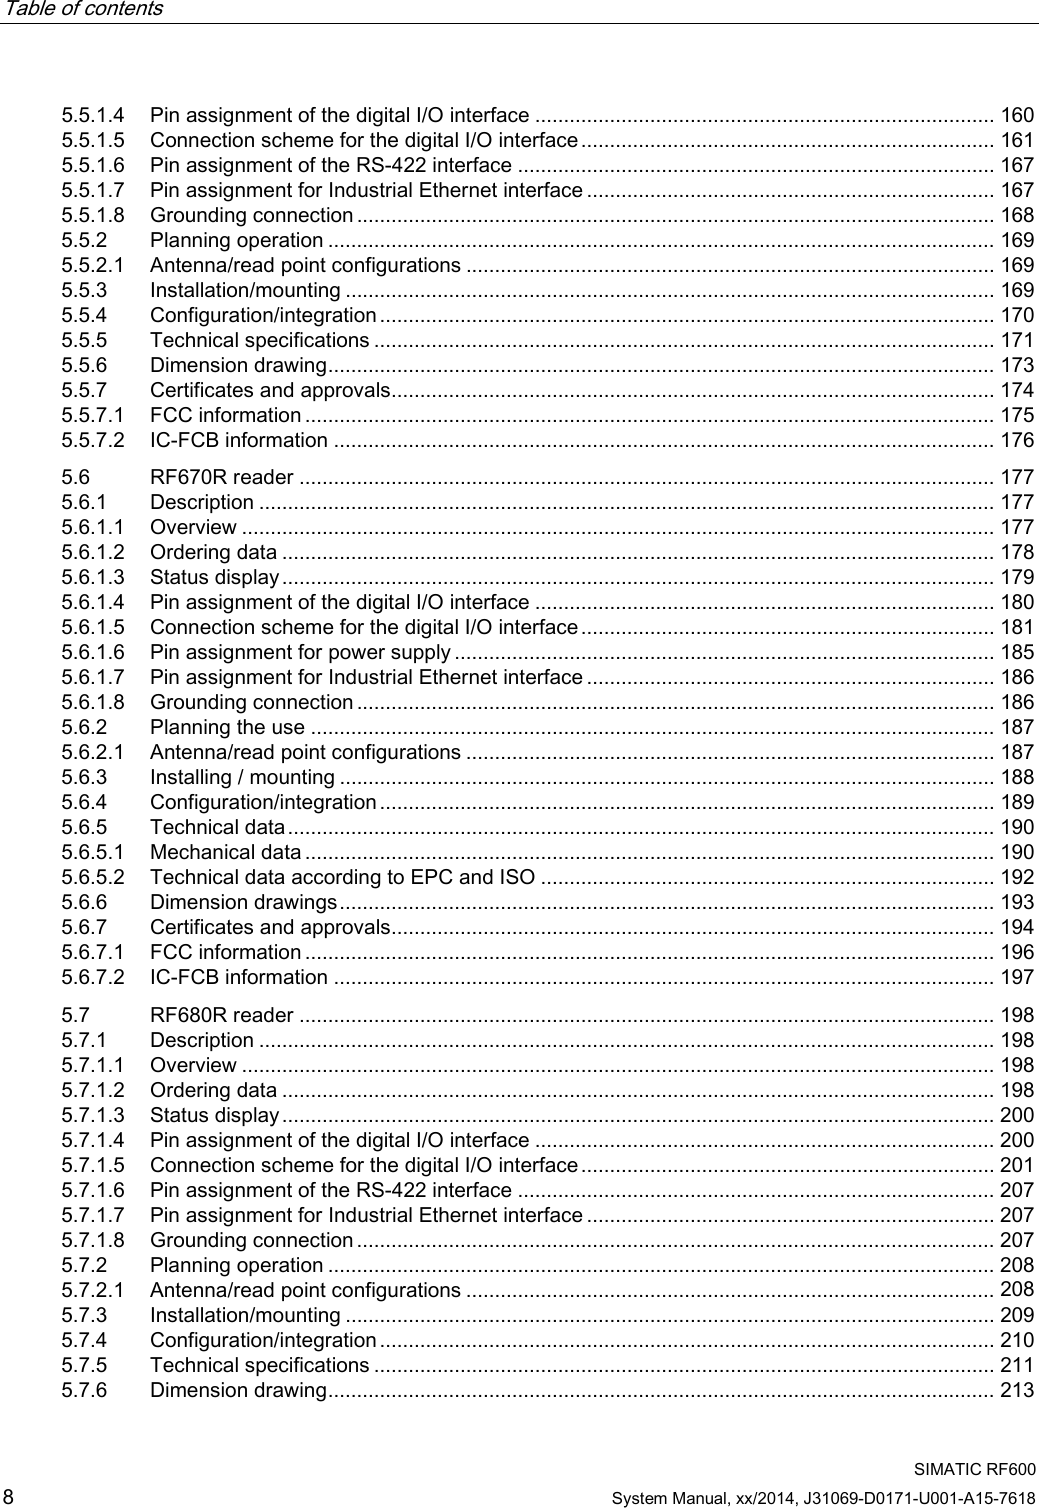 Table of contents      SIMATIC RF600 8 System Manual, xx/2014, J31069-D0171-U001-A15-7618 5.5.1.4 Pin assignment of the digital I/O interface ................................................................................ 160 5.5.1.5 Connection scheme for the digital I/O interface ........................................................................ 161 5.5.1.6 Pin assignment of the RS-422 interface ................................................................................... 167 5.5.1.7 Pin assignment for Industrial Ethernet interface ....................................................................... 167 5.5.1.8 Grounding connection ............................................................................................................... 168 5.5.2 Planning operation .................................................................................................................... 169 5.5.2.1 Antenna/read point configurations ............................................................................................ 169 5.5.3 Installation/mounting ................................................................................................................. 169 5.5.4 Configuration/integration ........................................................................................................... 170 5.5.5 Technical specifications ............................................................................................................ 171 5.5.6 Dimension drawing .................................................................................................................... 173 5.5.7 Certificates and approvals......................................................................................................... 174 5.5.7.1 FCC information ........................................................................................................................ 175 5.5.7.2 IC-FCB information ................................................................................................................... 176 5.6 RF670R reader ......................................................................................................................... 177 5.6.1 Description ................................................................................................................................ 177 5.6.1.1 Overview ................................................................................................................................... 177 5.6.1.2 Ordering data ............................................................................................................................ 178 5.6.1.3 Status display ............................................................................................................................ 179 5.6.1.4 Pin assignment of the digital I/O interface ................................................................................ 180 5.6.1.5 Connection scheme for the digital I/O interface ........................................................................ 181 5.6.1.6 Pin assignment for power supply .............................................................................................. 185 5.6.1.7 Pin assignment for Industrial Ethernet interface ....................................................................... 186 5.6.1.8 Grounding connection ............................................................................................................... 186 5.6.2 Planning the use ....................................................................................................................... 187 5.6.2.1 Antenna/read point configurations ............................................................................................ 187 5.6.3 Installing / mounting .................................................................................................................. 188 5.6.4 Configuration/integration ........................................................................................................... 189 5.6.5 Technical data ........................................................................................................................... 190 5.6.5.1 Mechanical data ........................................................................................................................ 190 5.6.5.2 Technical data according to EPC and ISO ............................................................................... 192 5.6.6 Dimension drawings .................................................................................................................. 193 5.6.7 Certificates and approvals......................................................................................................... 194 5.6.7.1 FCC information ........................................................................................................................ 196 5.6.7.2 IC-FCB information ................................................................................................................... 197 5.7 RF680R reader ......................................................................................................................... 198 5.7.1 Description ................................................................................................................................ 198 5.7.1.1 Overview ................................................................................................................................... 198 5.7.1.2 Ordering data ............................................................................................................................ 198 5.7.1.3 Status display ............................................................................................................................ 200 5.7.1.4 Pin assignment of the digital I/O interface ................................................................................ 200 5.7.1.5 Connection scheme for the digital I/O interface ........................................................................ 201 5.7.1.6 Pin assignment of the RS-422 interface ................................................................................... 207 5.7.1.7 Pin assignment for Industrial Ethernet interface ....................................................................... 207 5.7.1.8 Grounding connection ............................................................................................................... 207 5.7.2 Planning operation .................................................................................................................... 208 5.7.2.1 Antenna/read point configurations ............................................................................................ 208 5.7.3 Installation/mounting ................................................................................................................. 209 5.7.4 Configuration/integration ........................................................................................................... 210 5.7.5 Technical specifications ............................................................................................................ 211 5.7.6 Dimension drawing .................................................................................................................... 213 